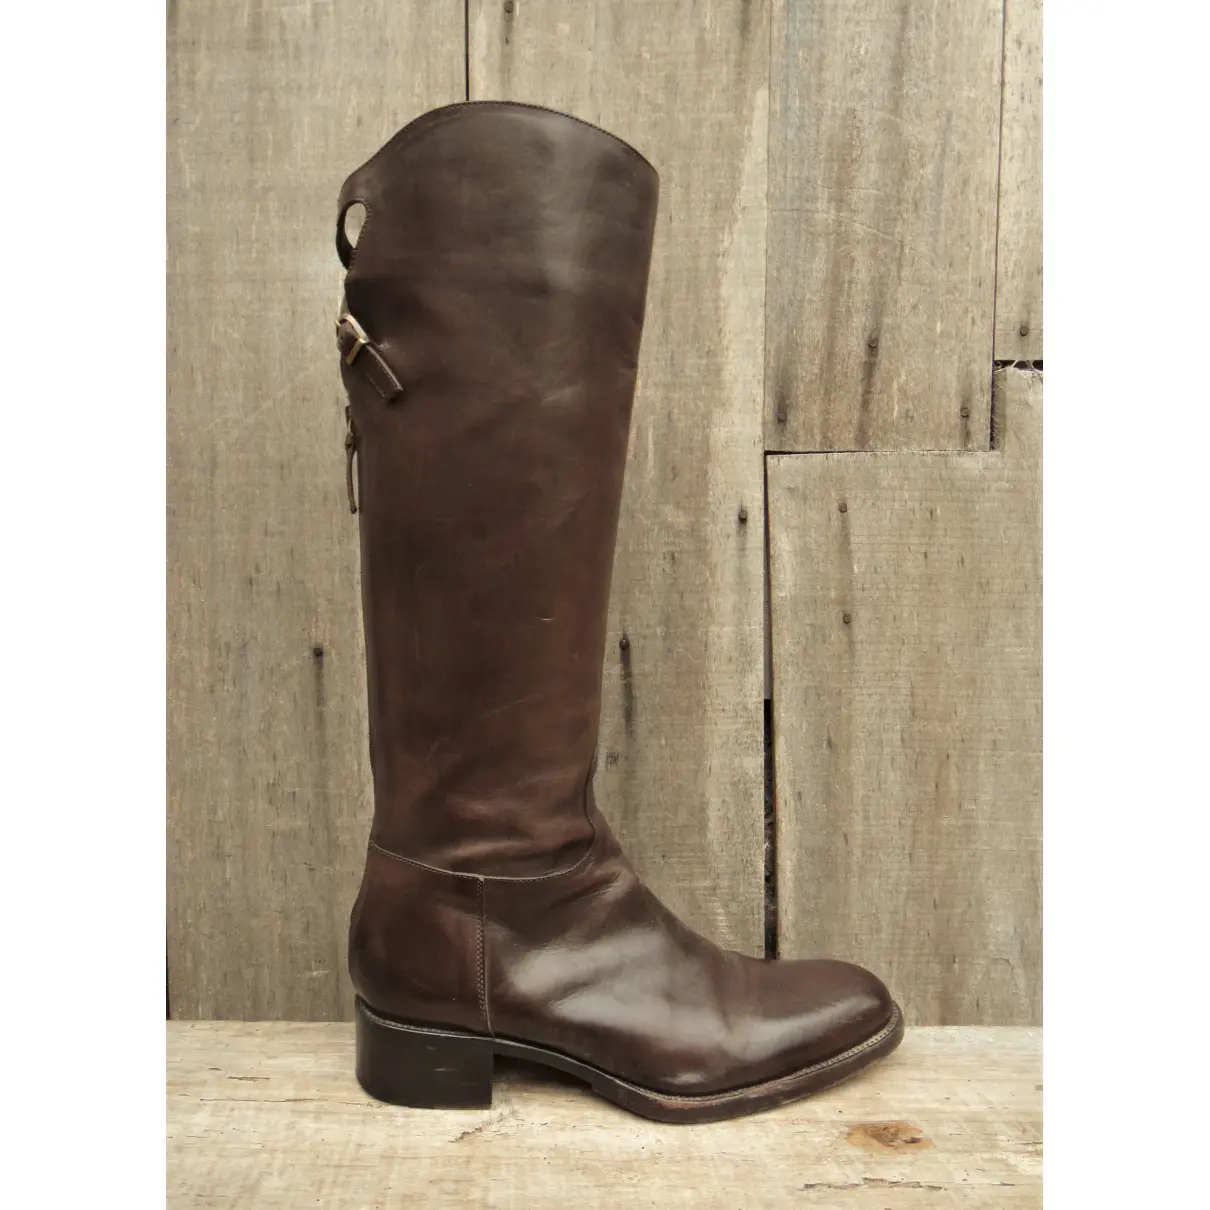 Buy Sartore Leather riding boots online